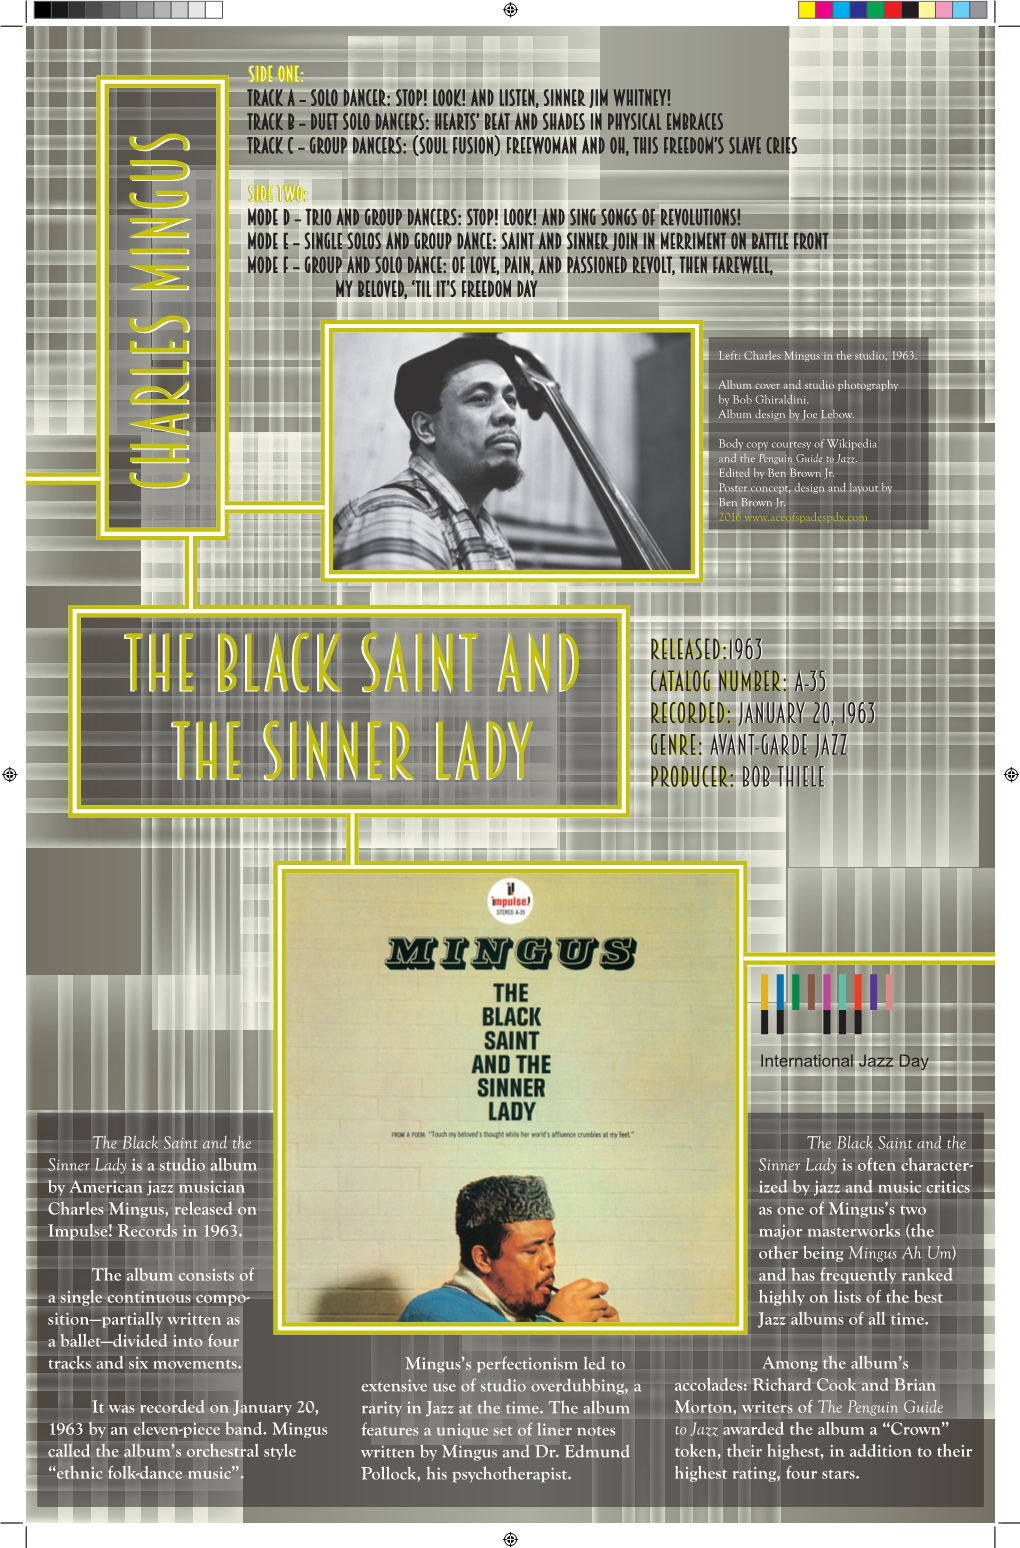 The Black Saint and the Sinner Lady Is a Studio Album by American Jazz